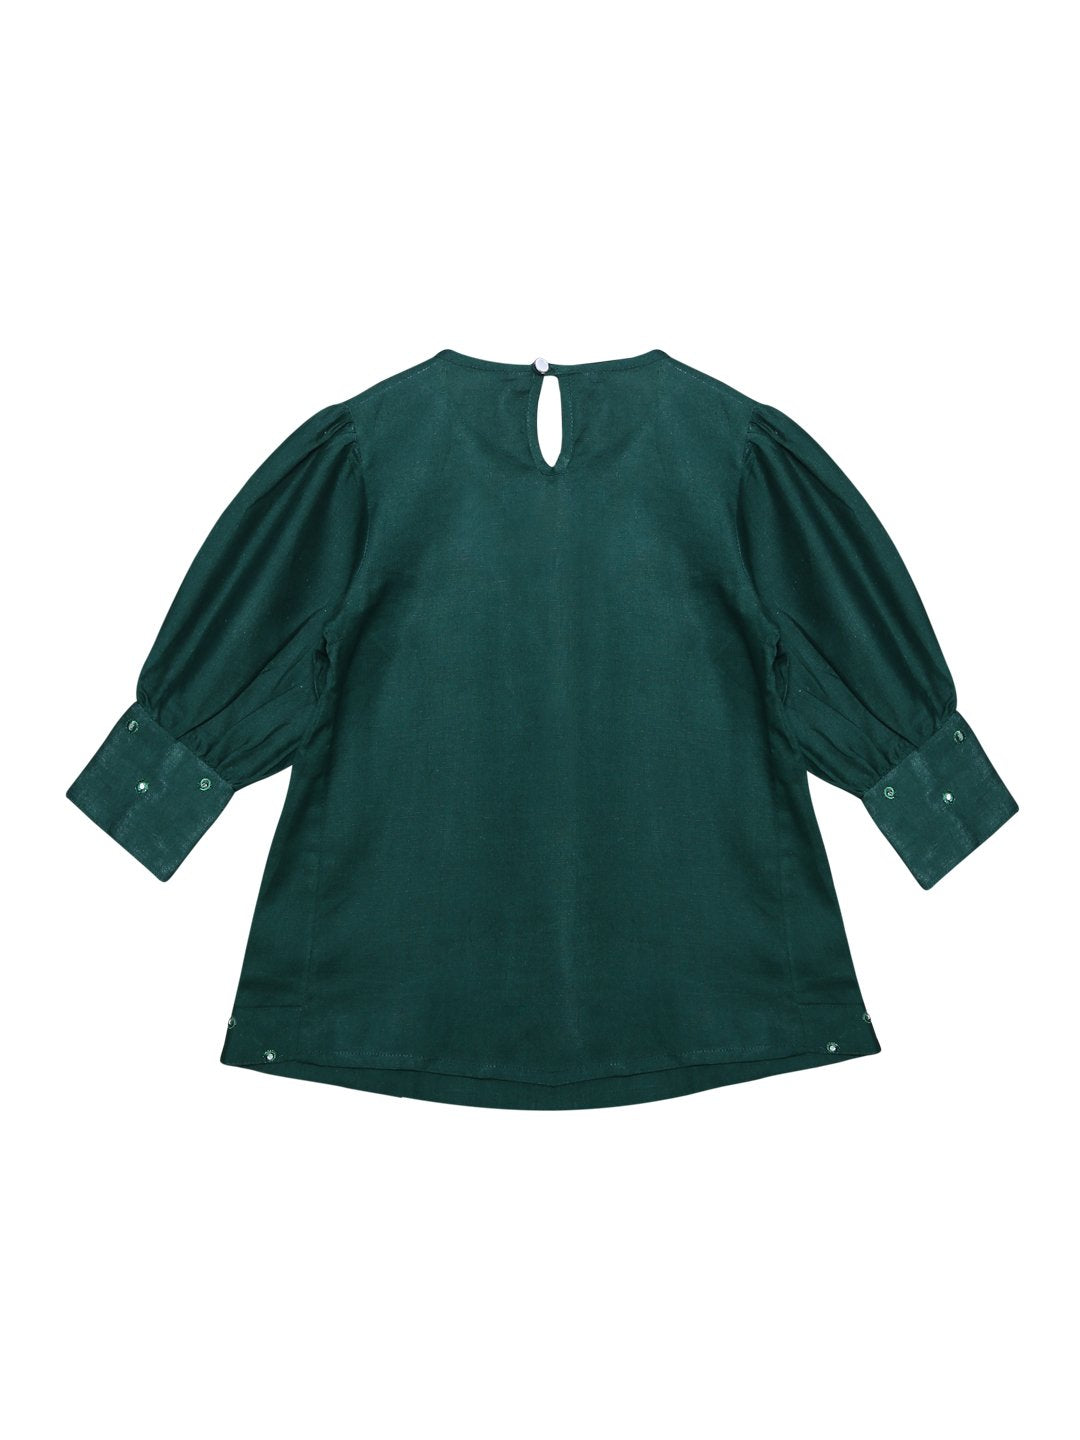 Ishin Girls Cotton Green Embroidered Top